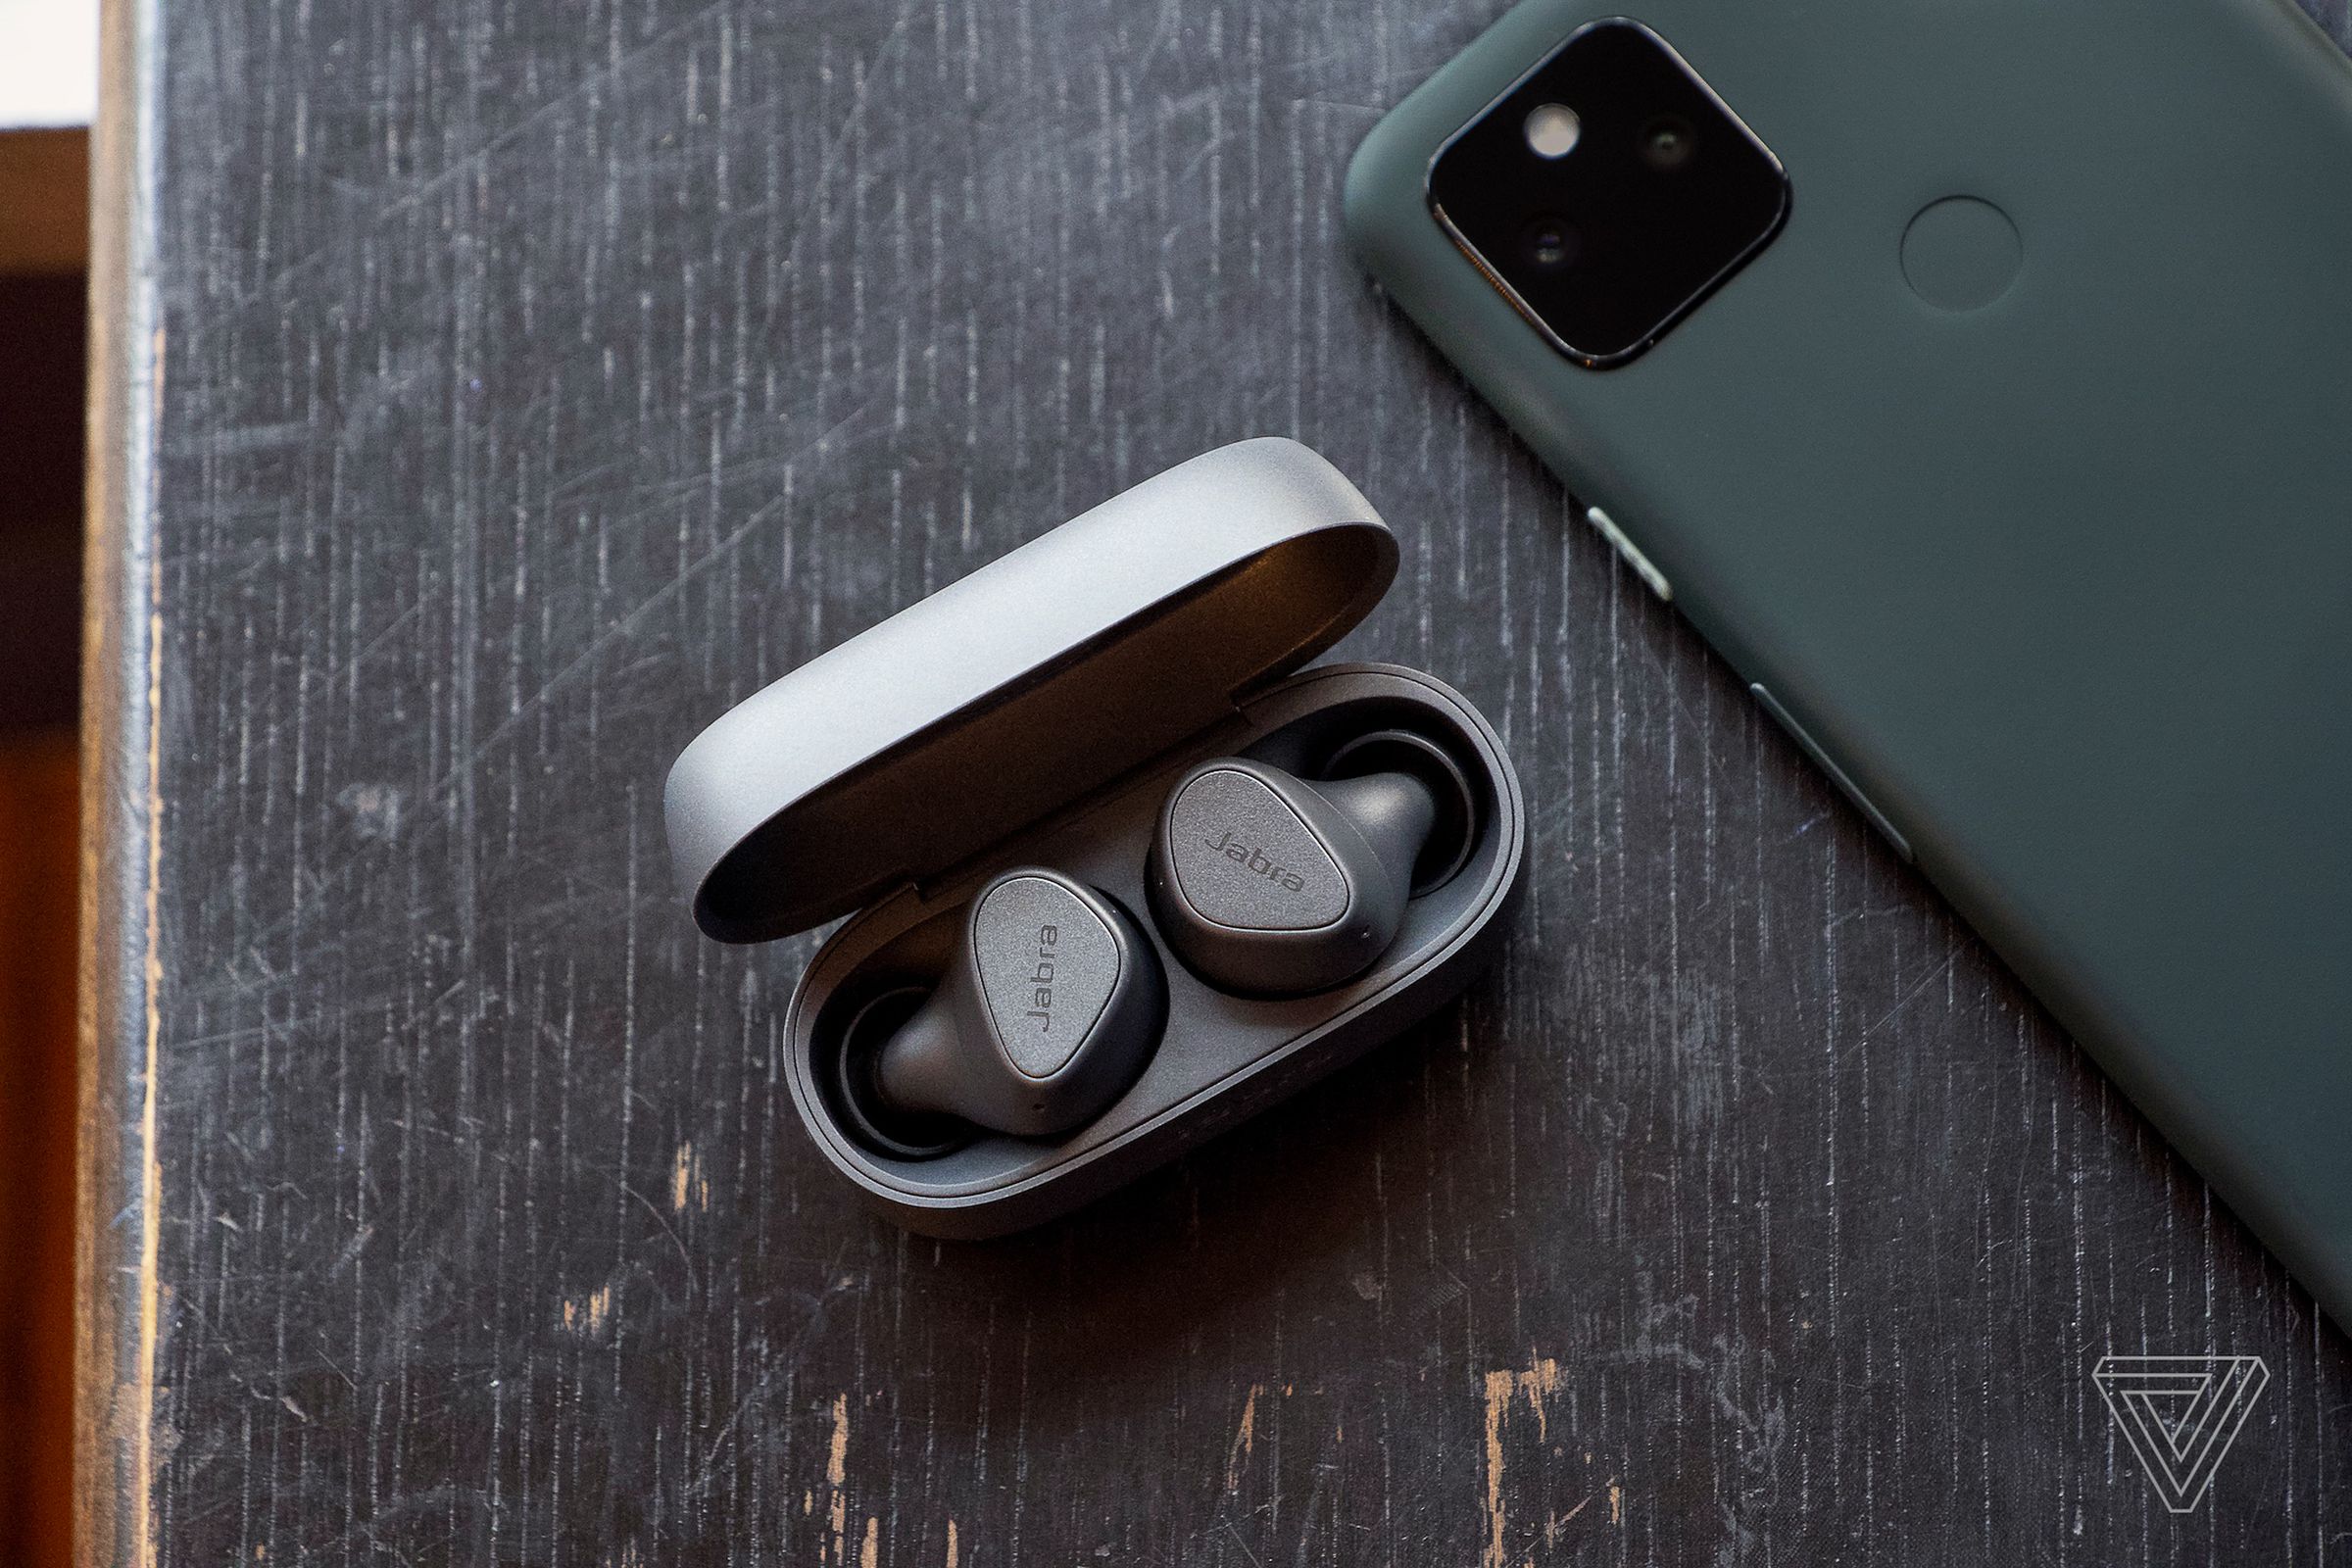 A pair of Jabra’s Elite 3 wireless earbuds sitting on a table near a phone.